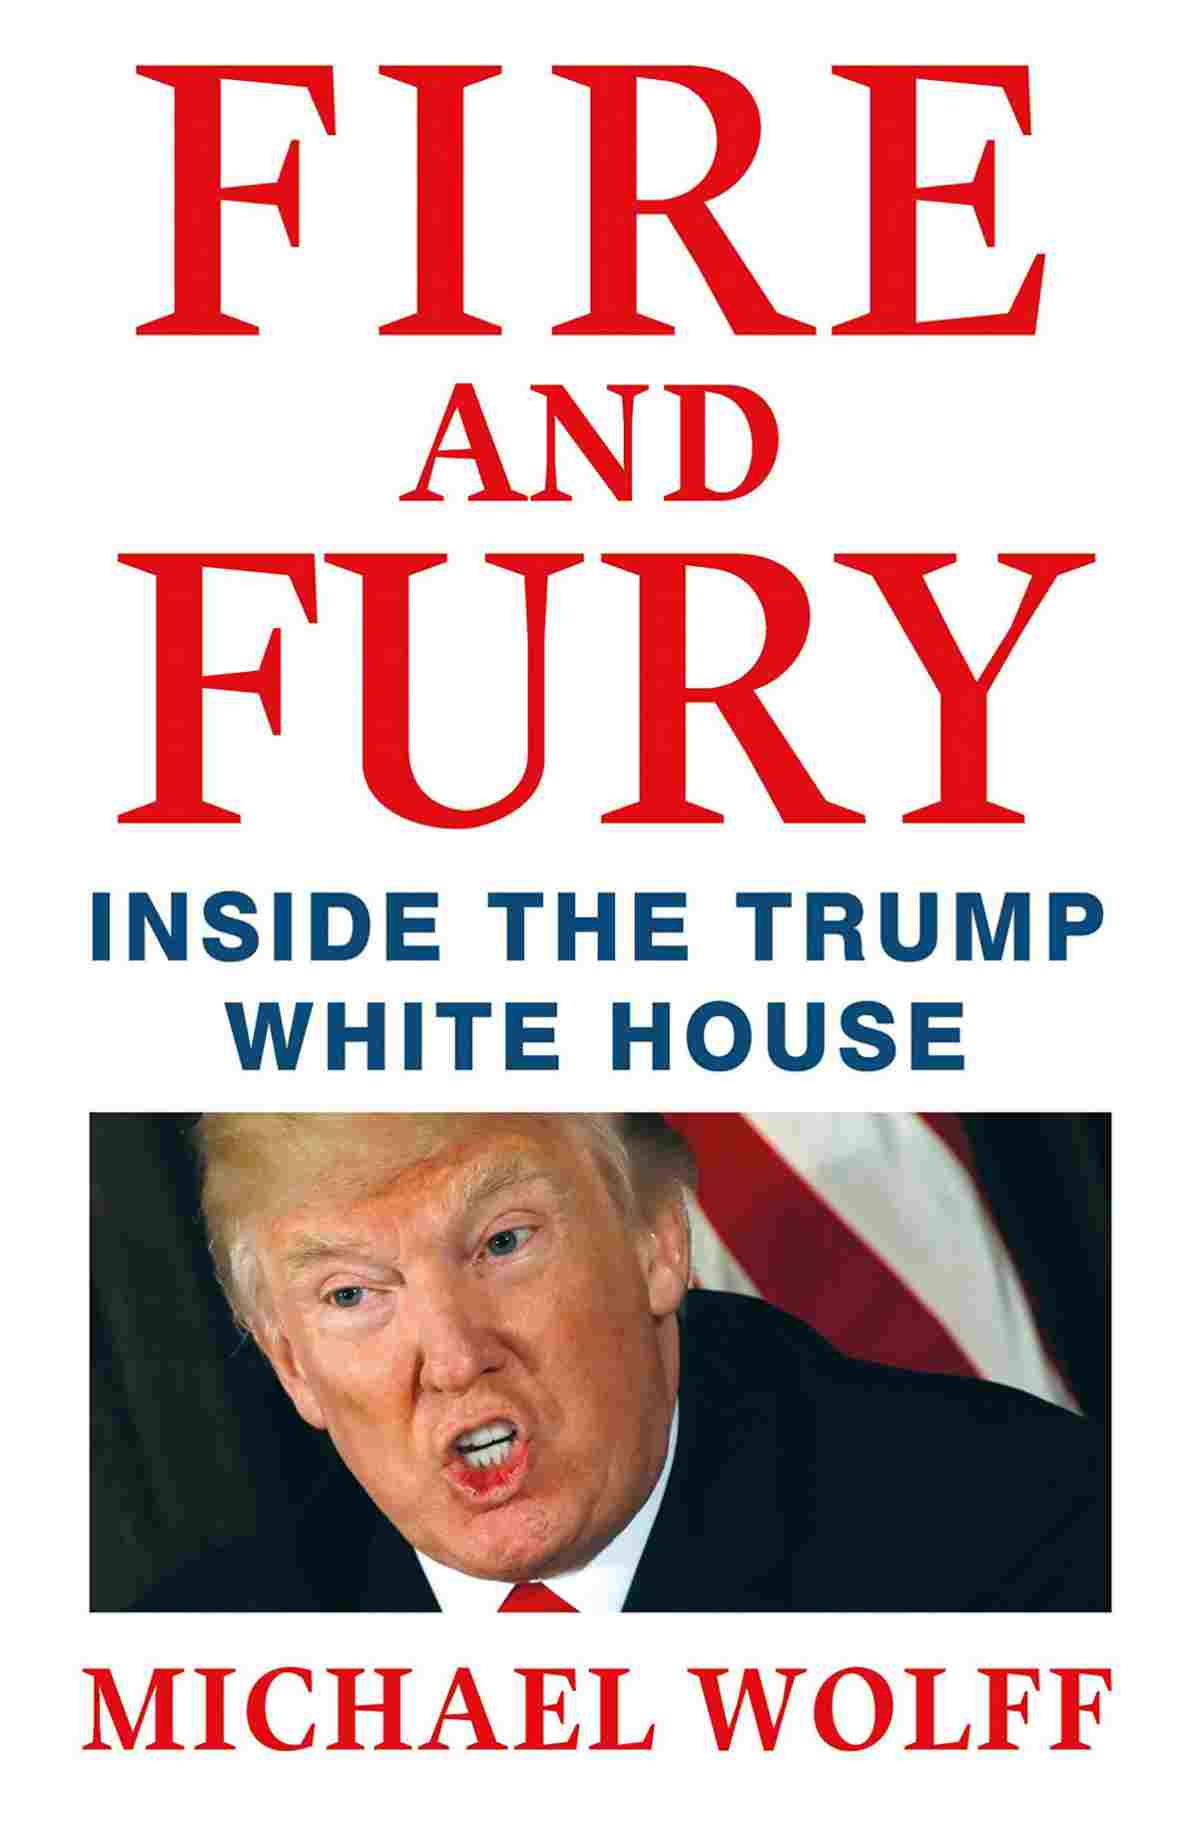 Fire and Fury: Inside the Trump White House | Bestselling Amazon Kindle Books Of 2018